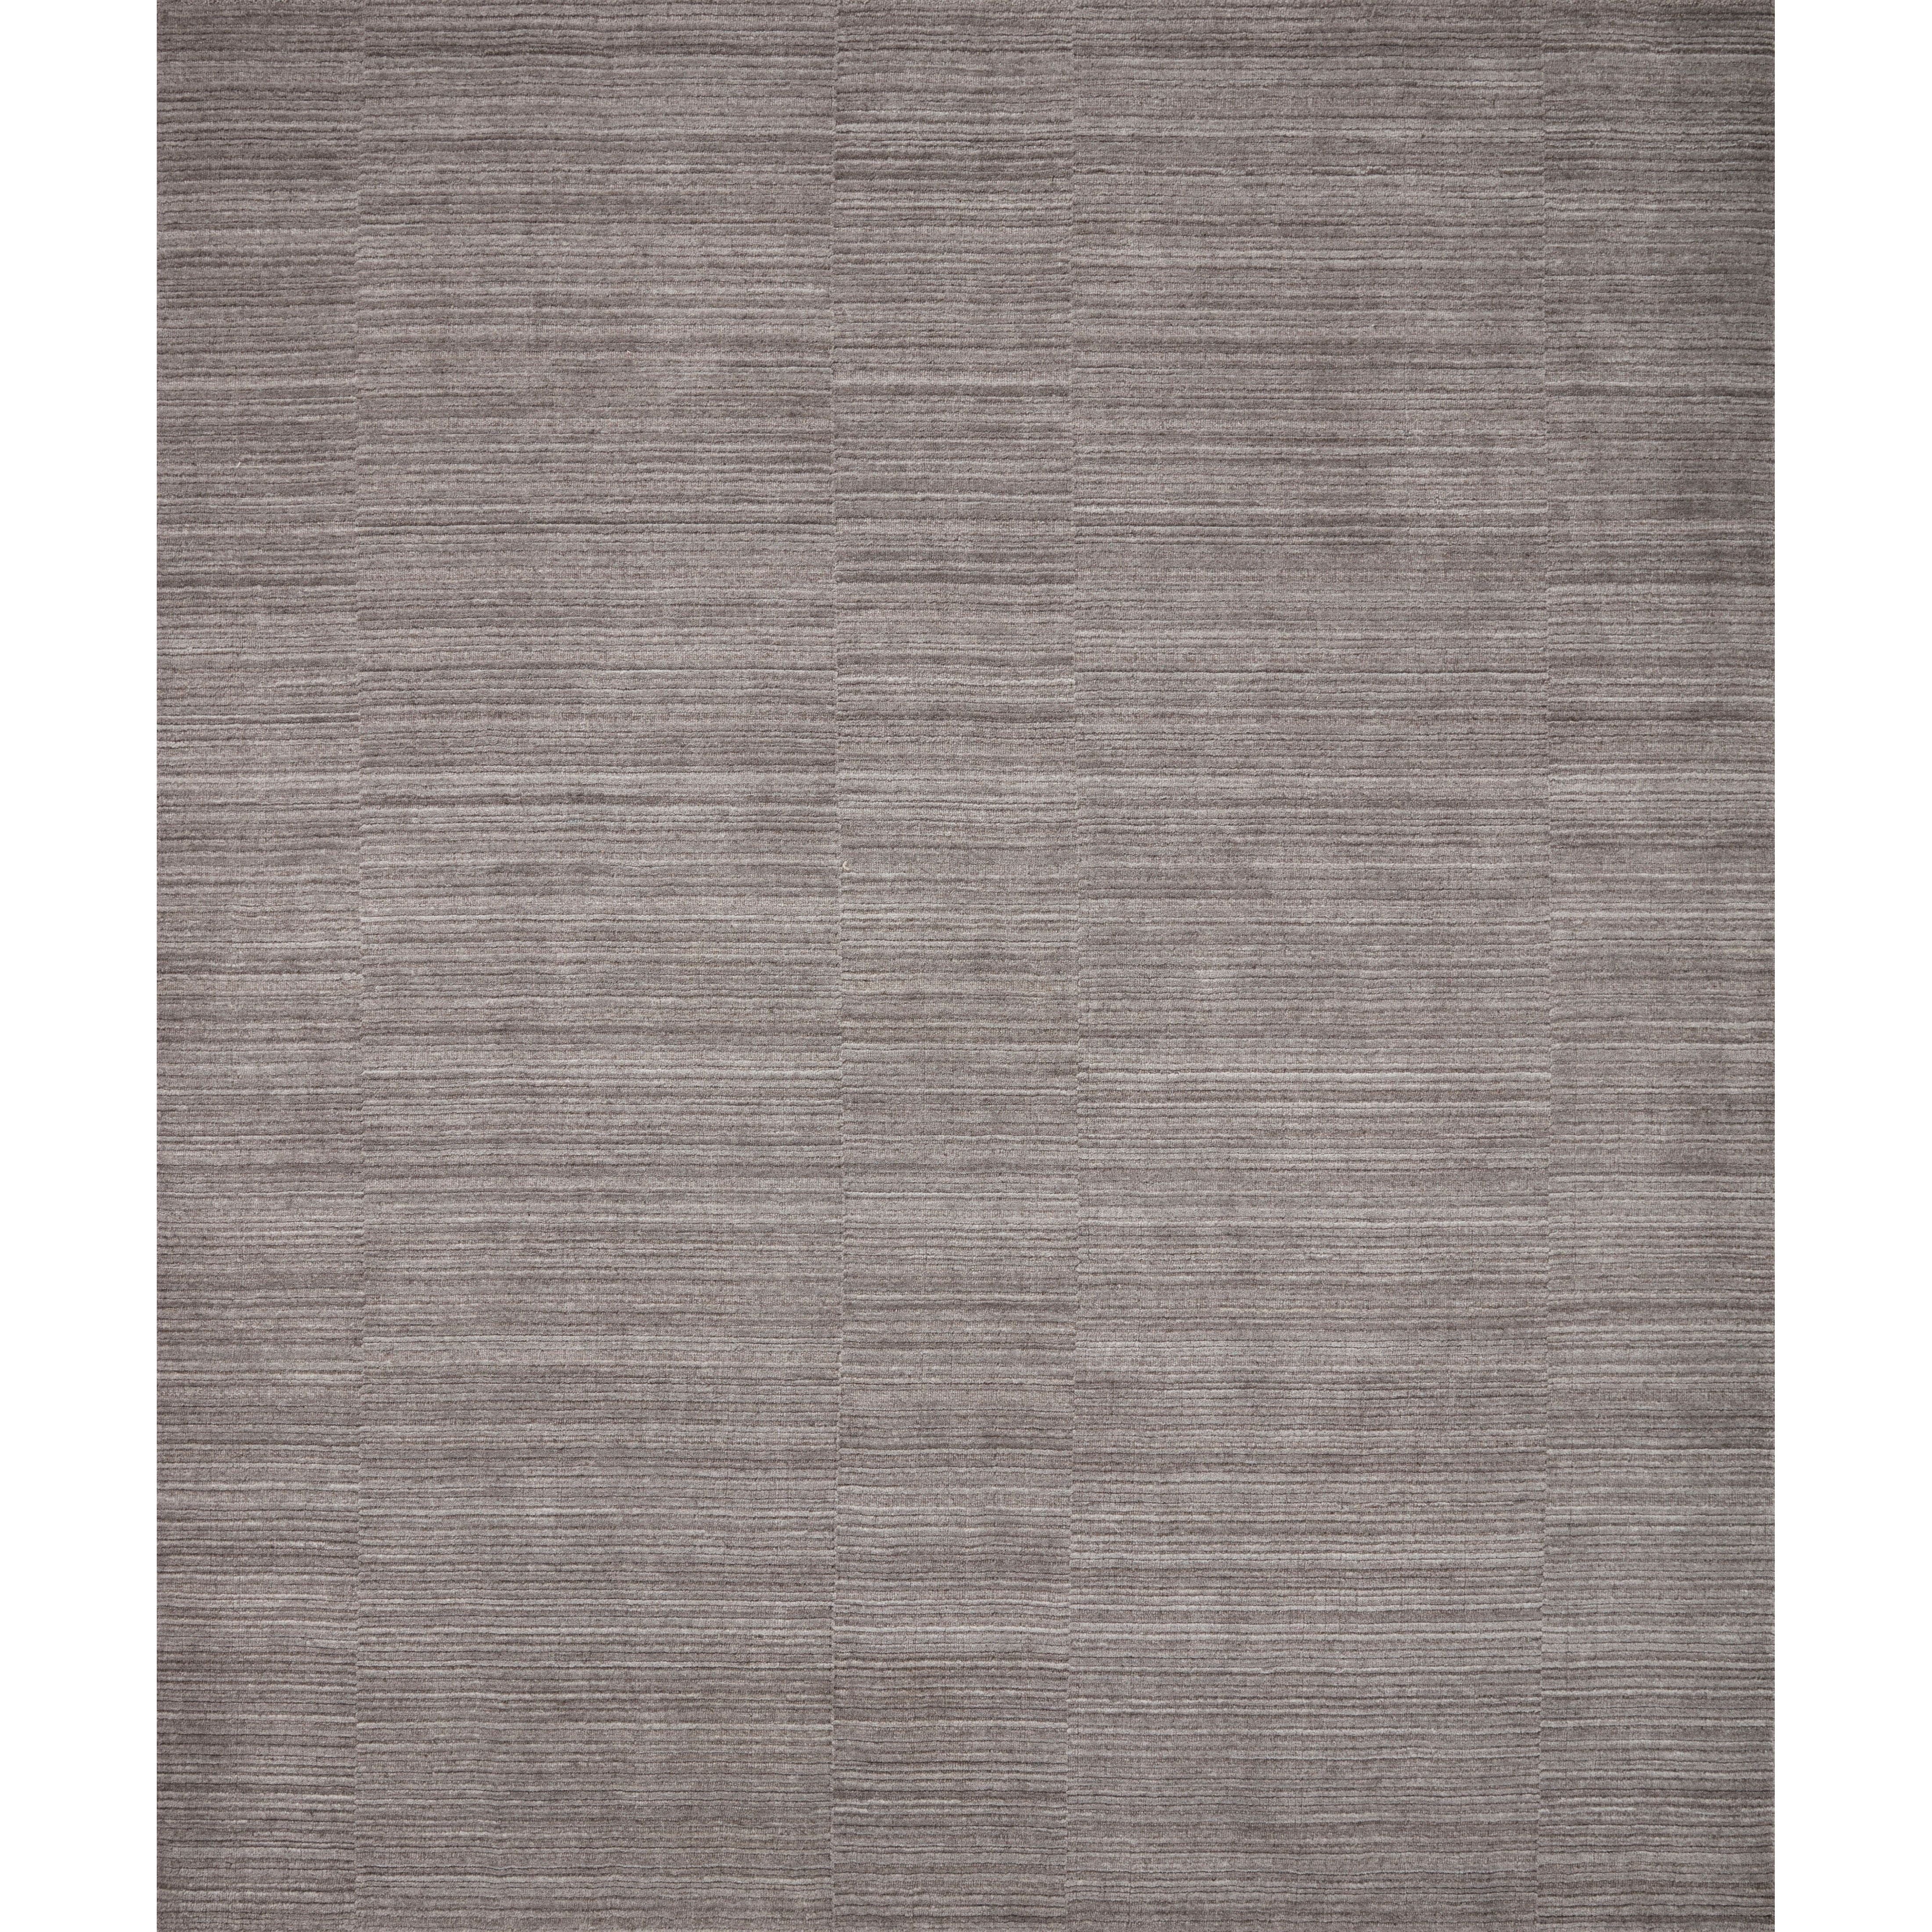 Sleek and modern, the Lou Collection is a luxurious hand-loomed area rug by Amber Lewis x Loloi. While the rug presents a minimal aesthetic, up close, it has a broken stripe pattern that creates a slightly ribbed effect. It’s made with a blend of wool and viscose that’s soft and durable, an elevated neutral for any room. Amethyst Home provides interior design, new home construction design consulting, vintage area rugs, and lighting in the Monterey metro area.